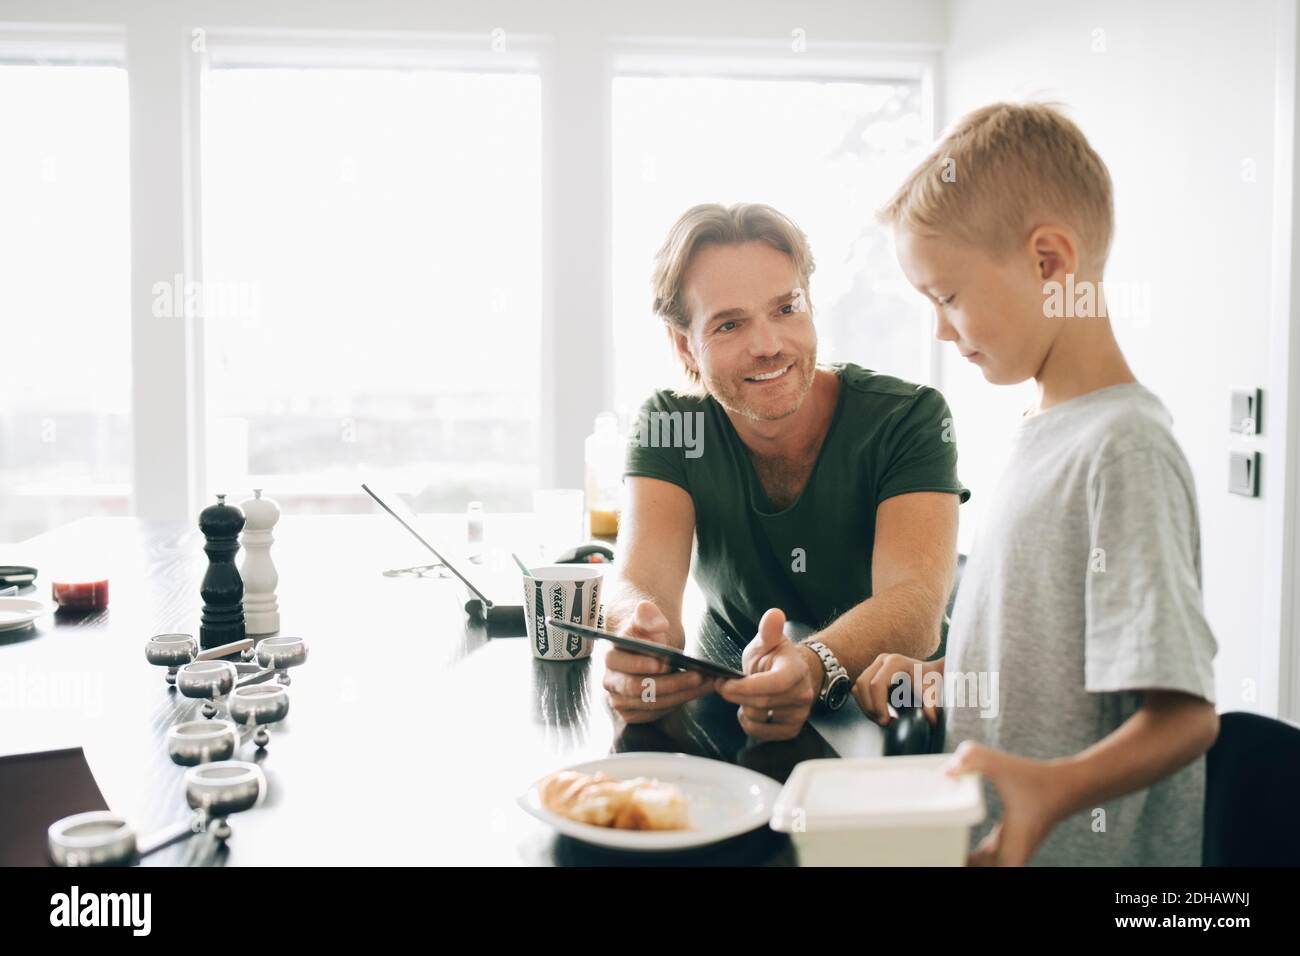 Smiling man showing digital tablet to boy at dining table against window Stock Photo